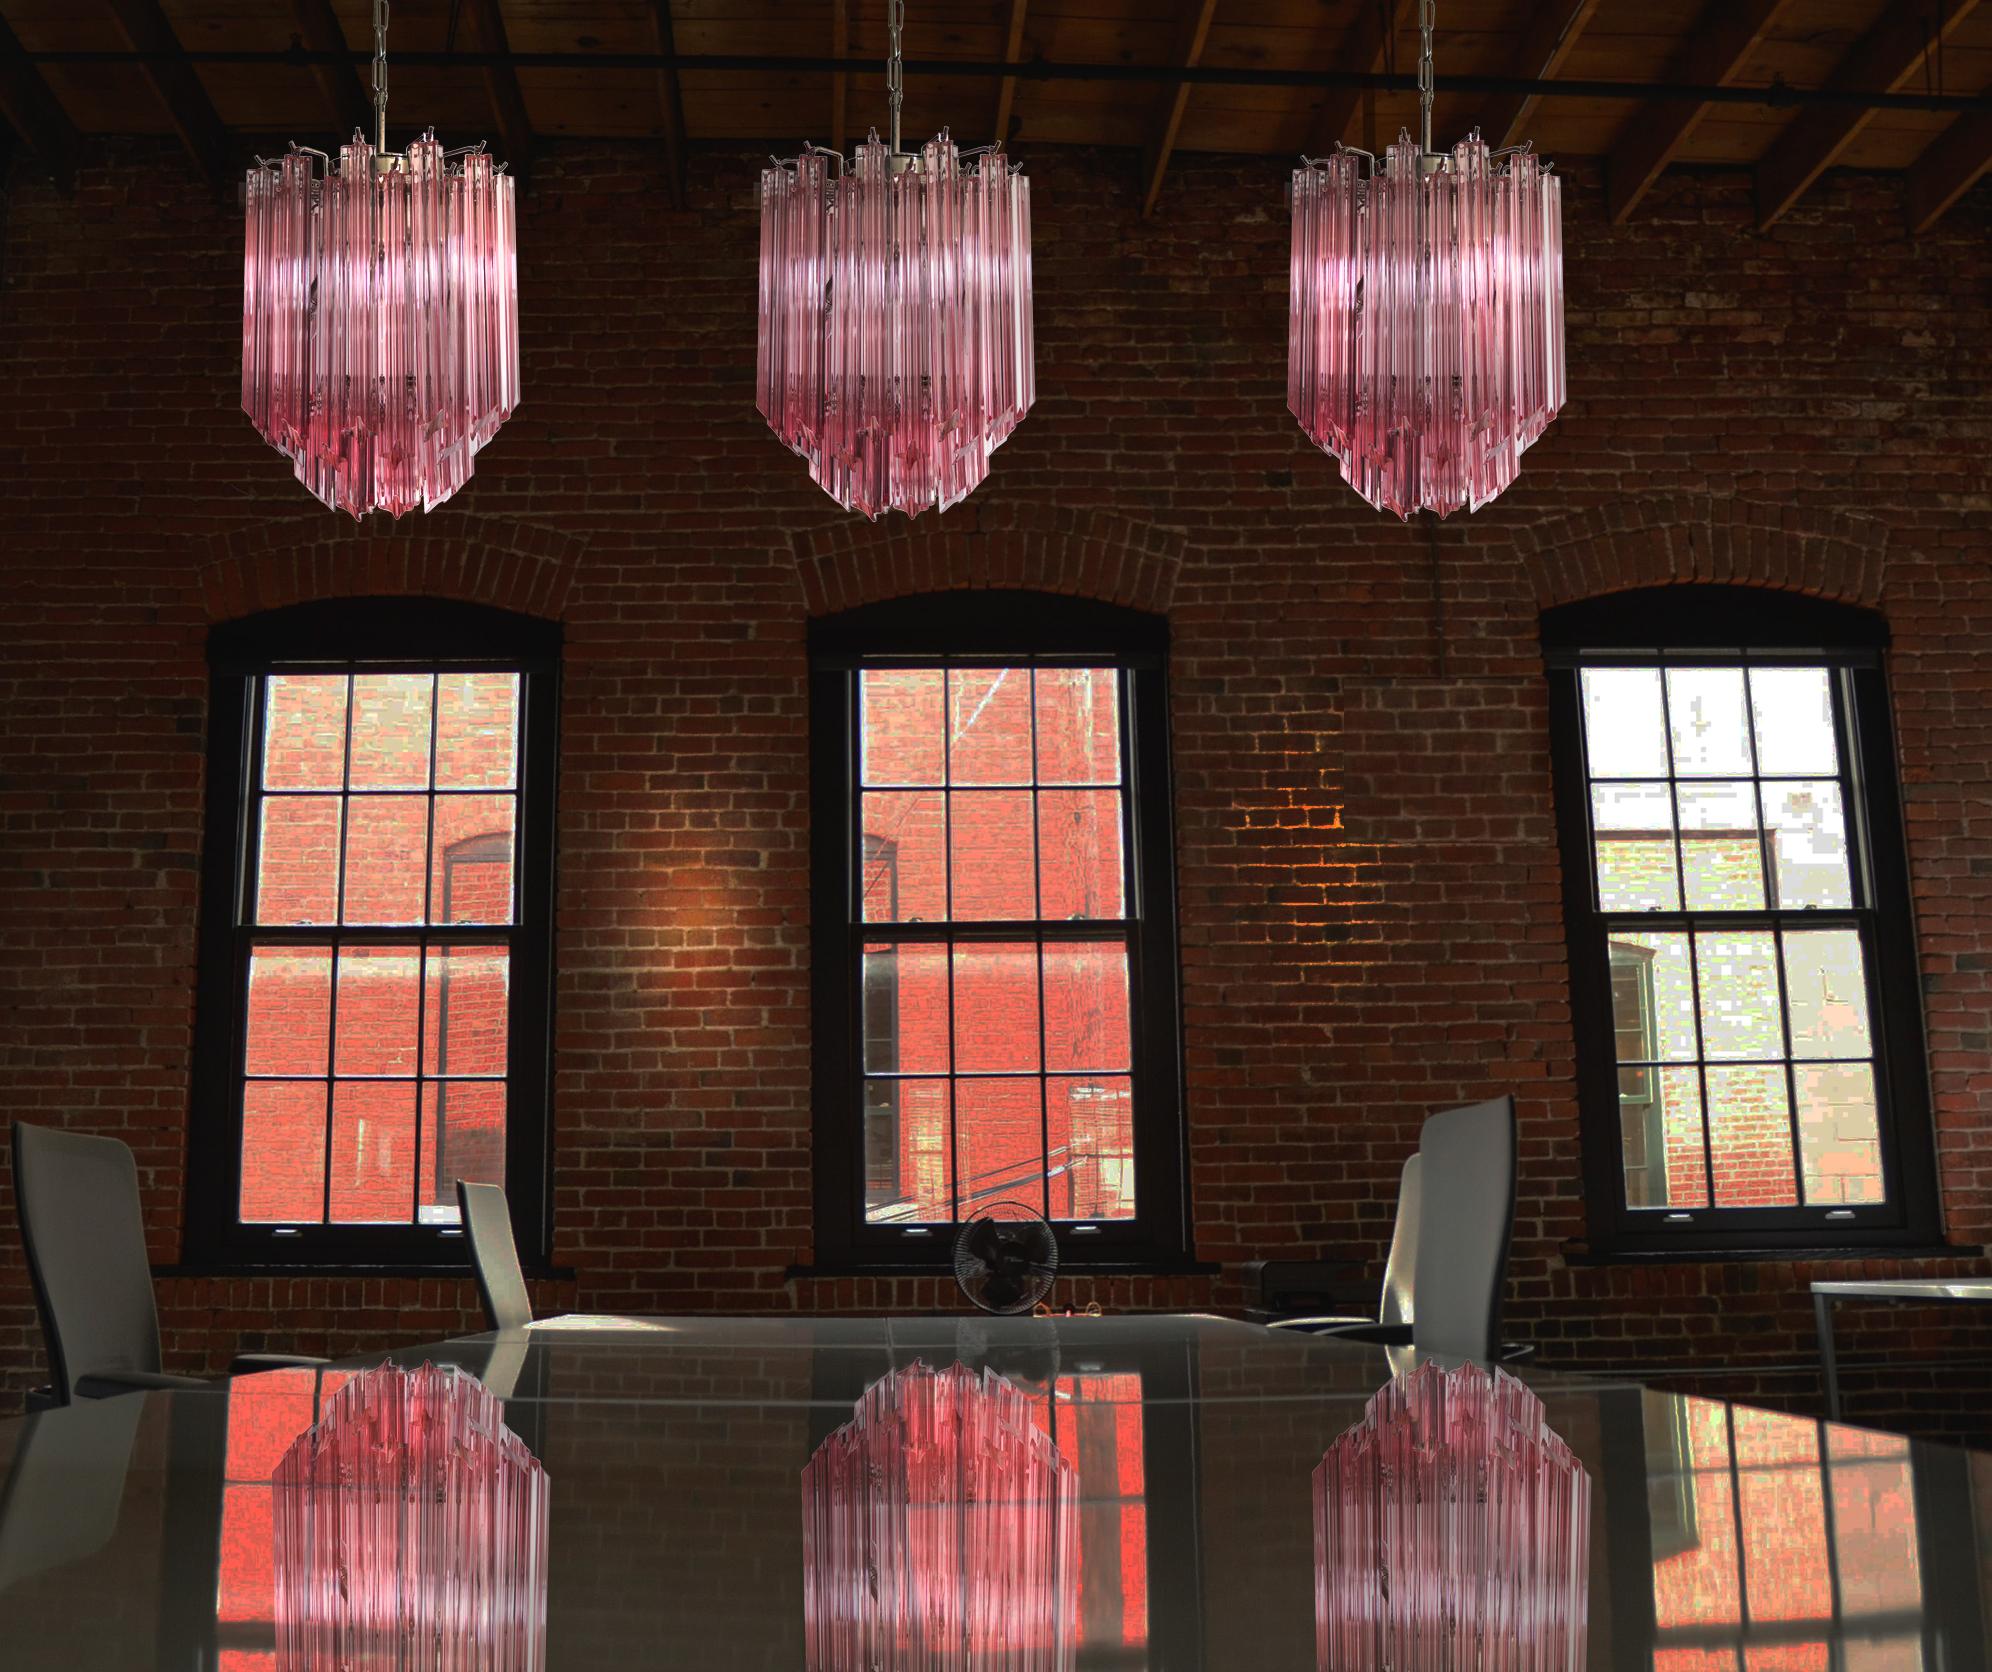 Trio Murano chandelier made by 47 Murano pink crystal prism 